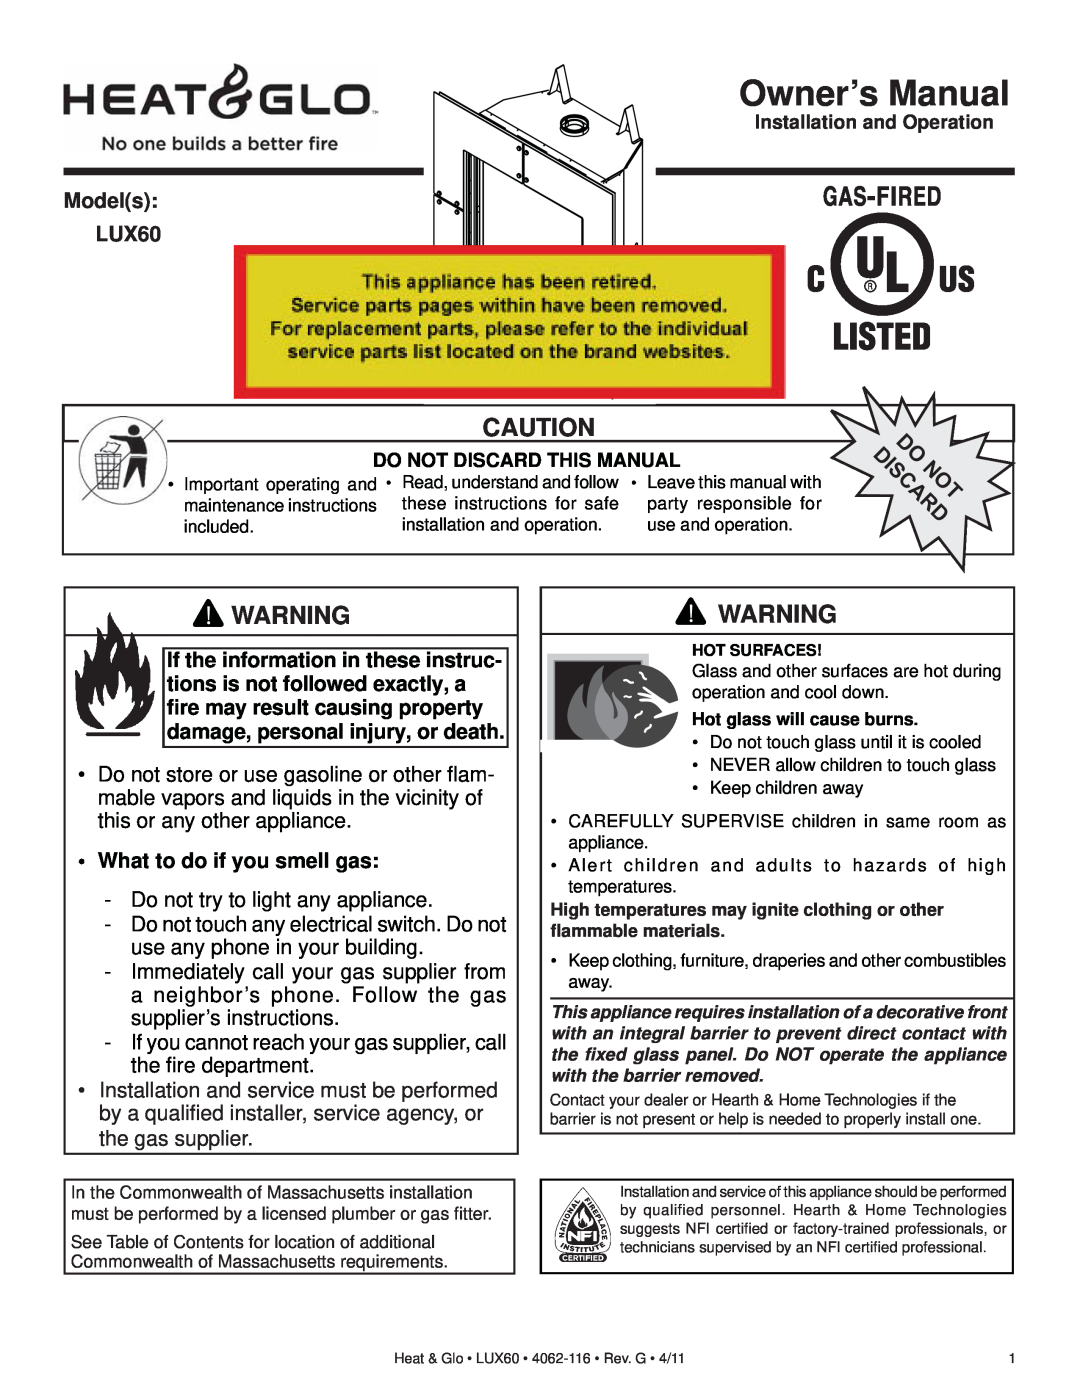 Heat & Glo LifeStyle owner manual Models LUX60, •What to do if you smell gas, Owner’s Manual 